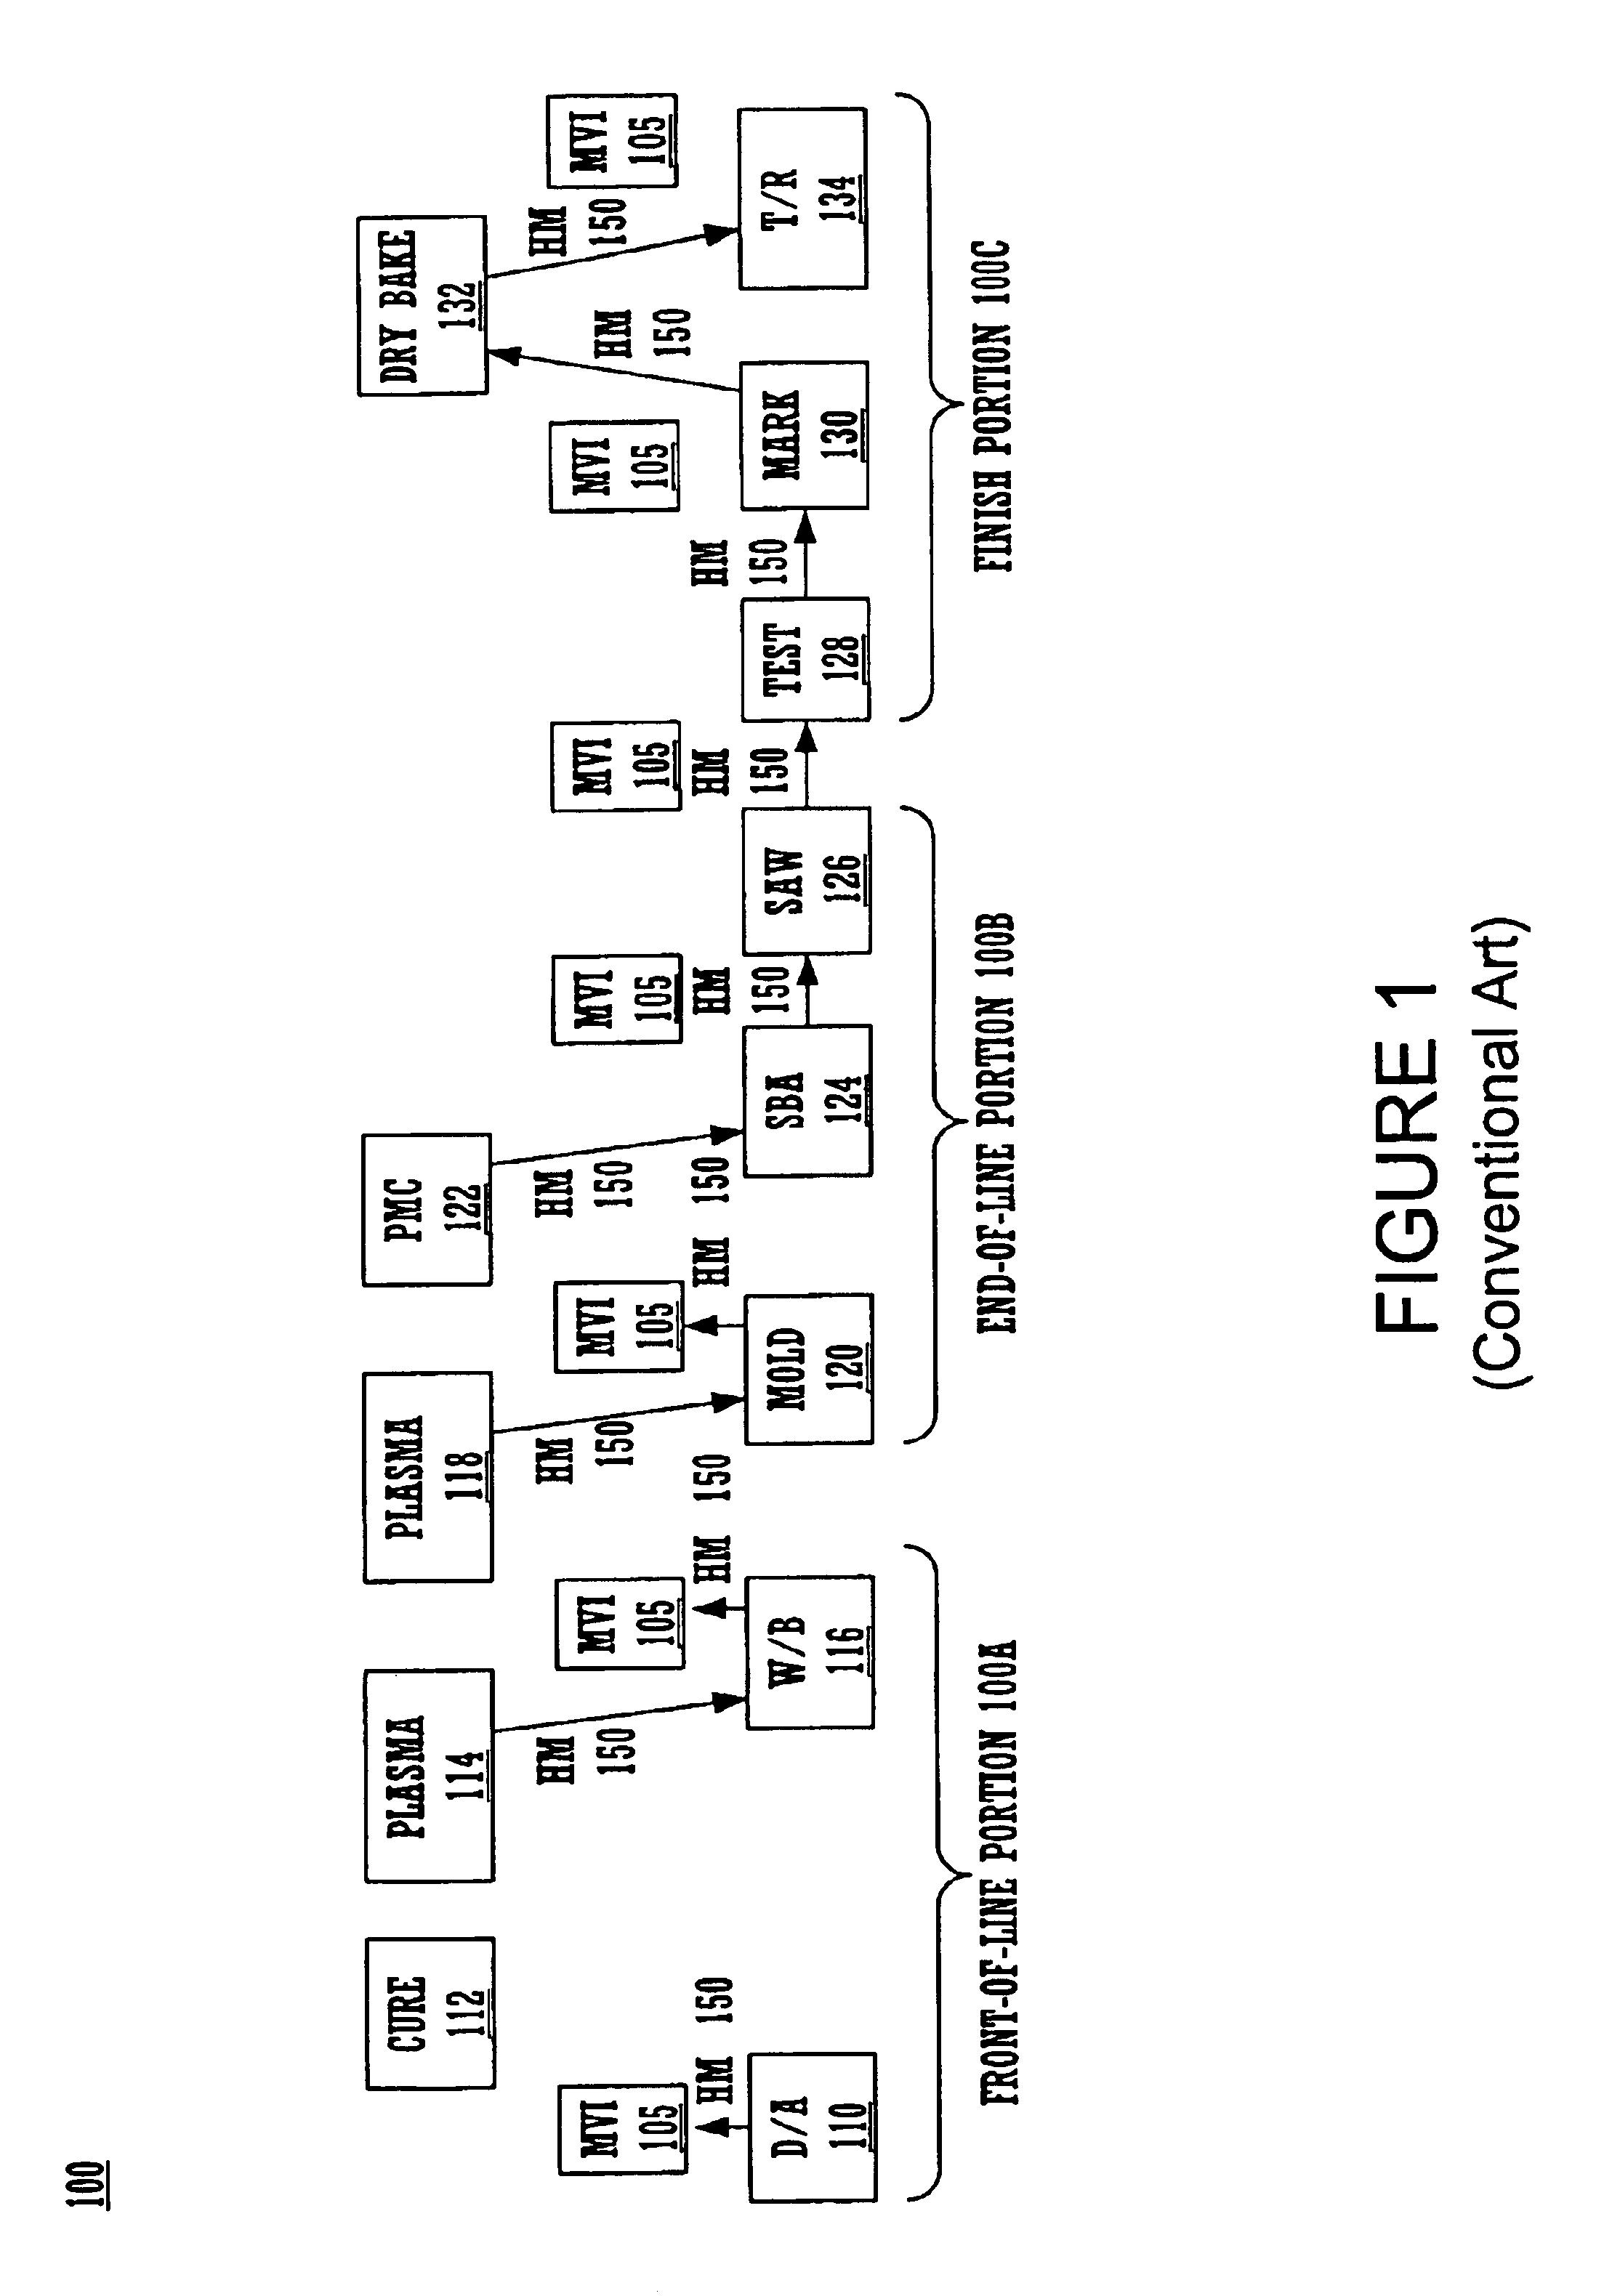 Integrated back-end integrated circuit manufacturing assembly